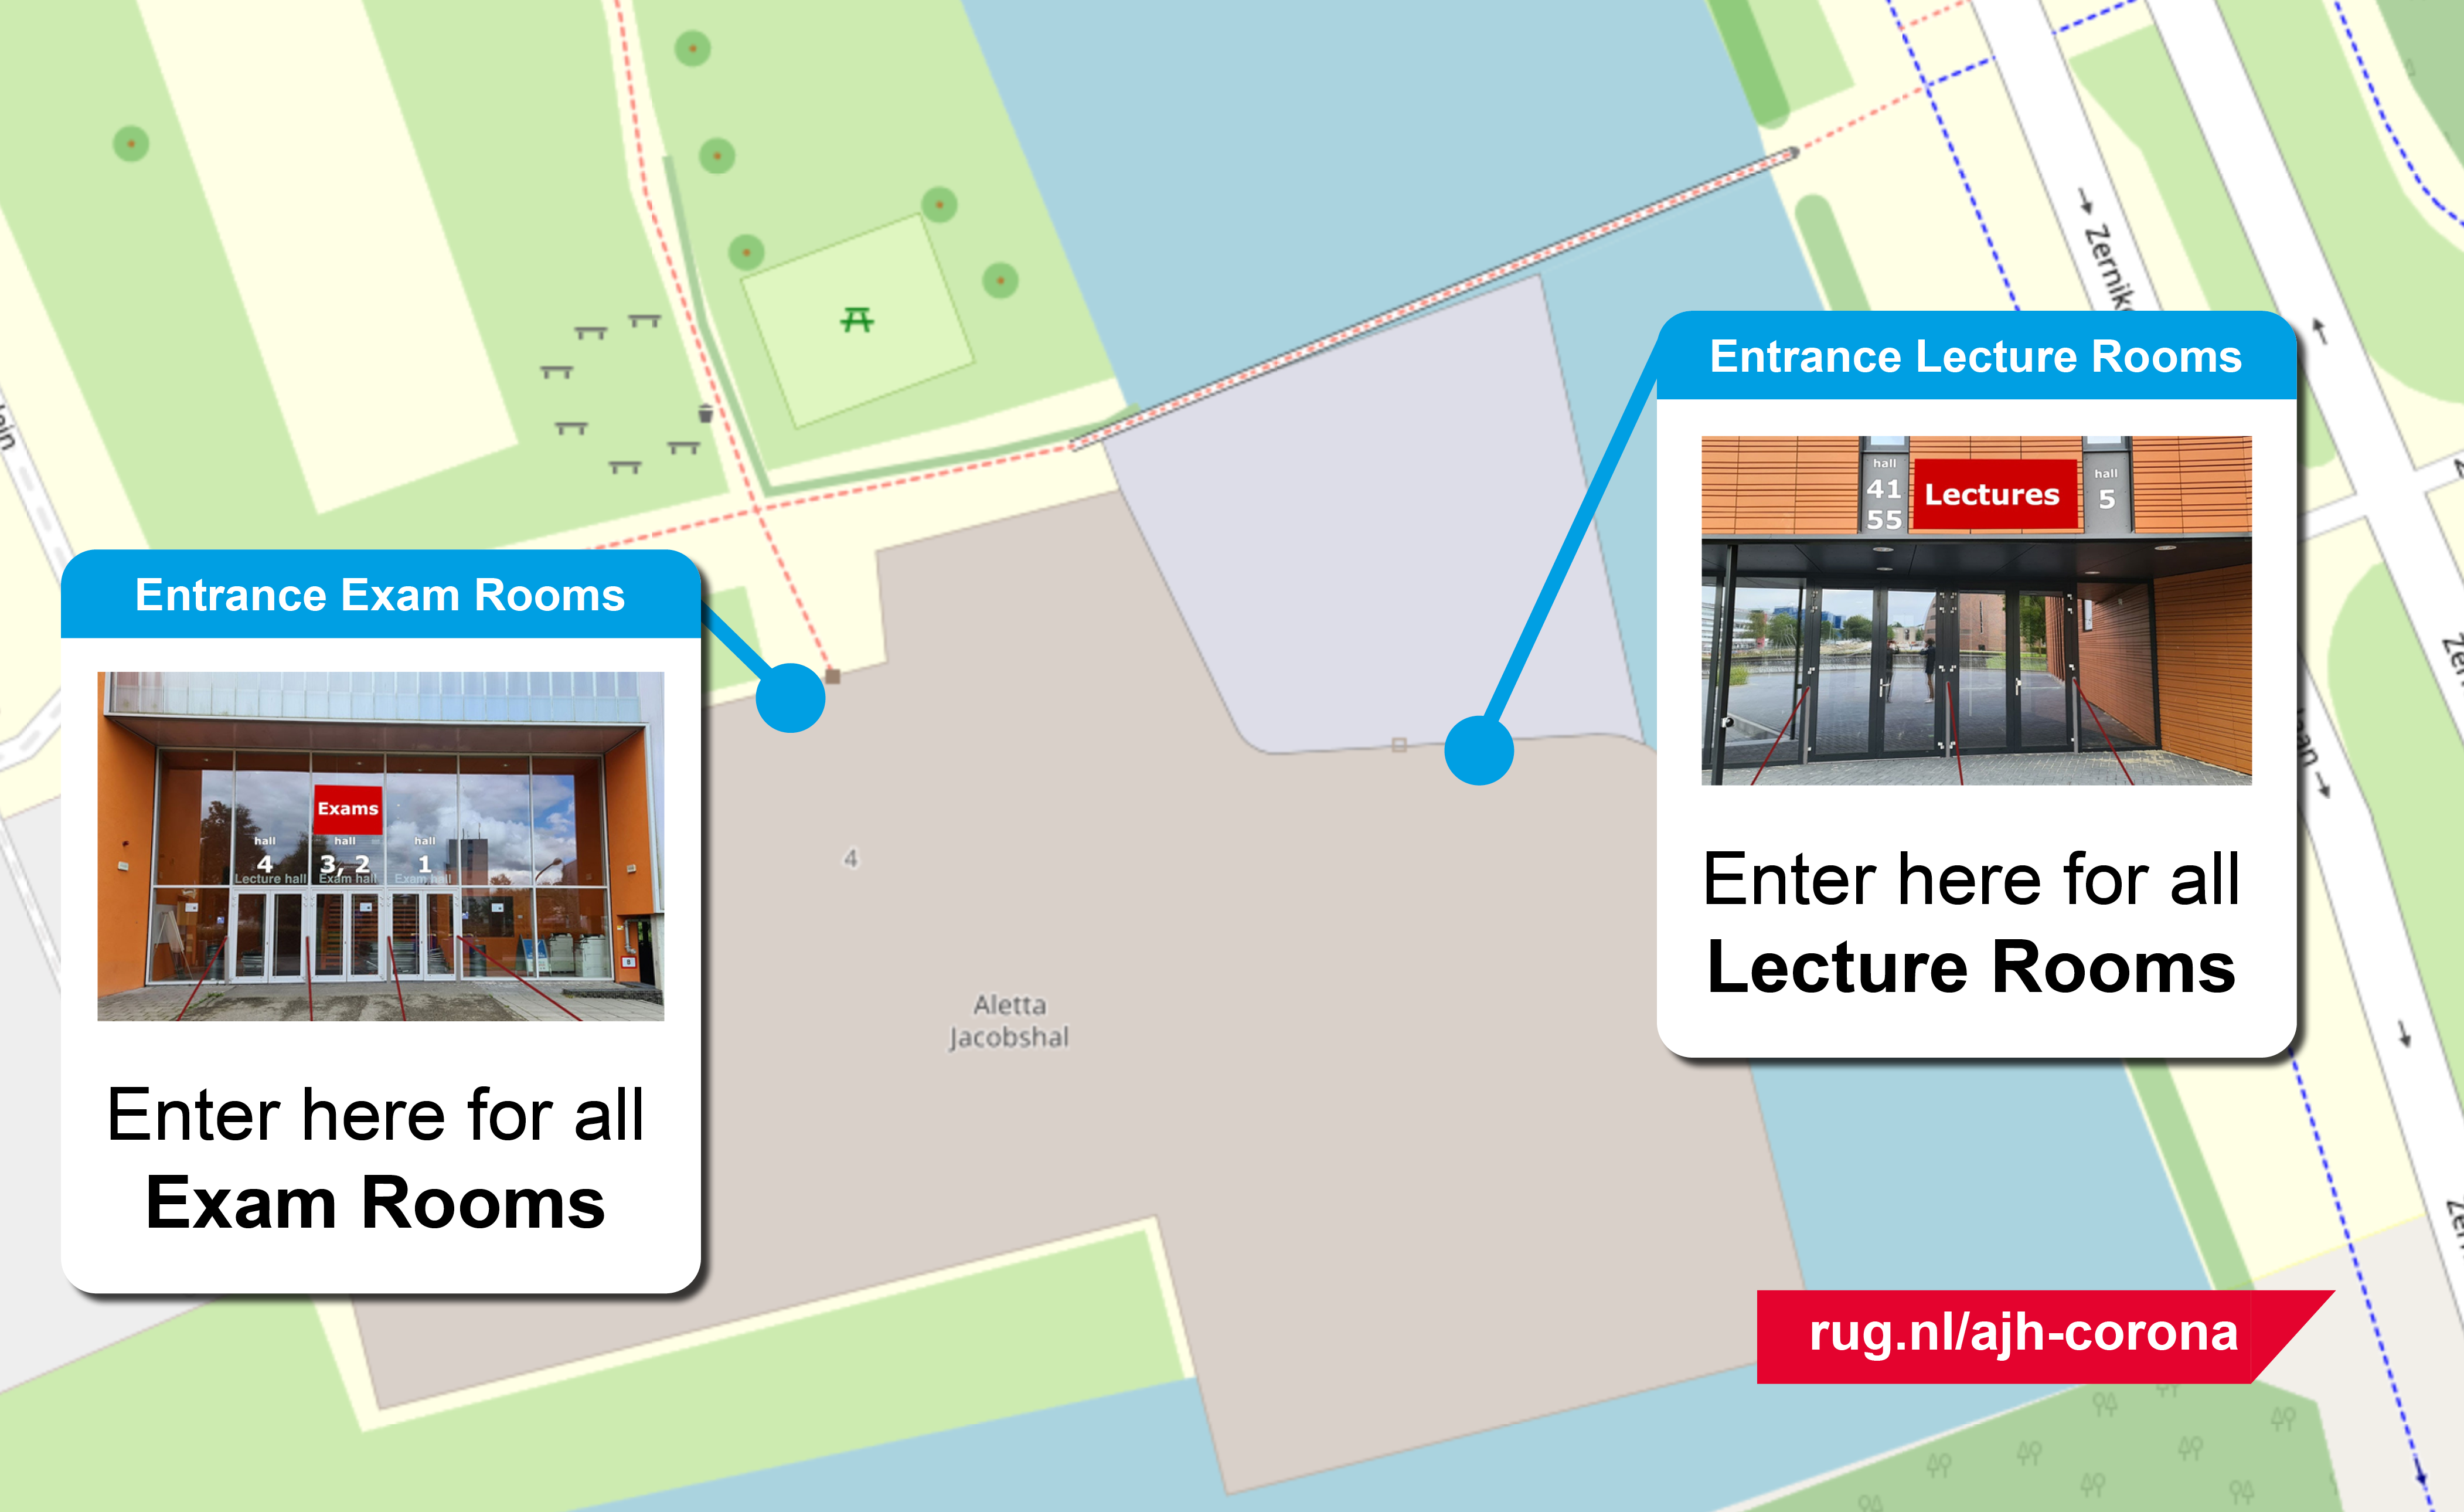 There are two separate entrances for the exams and lecture halls.